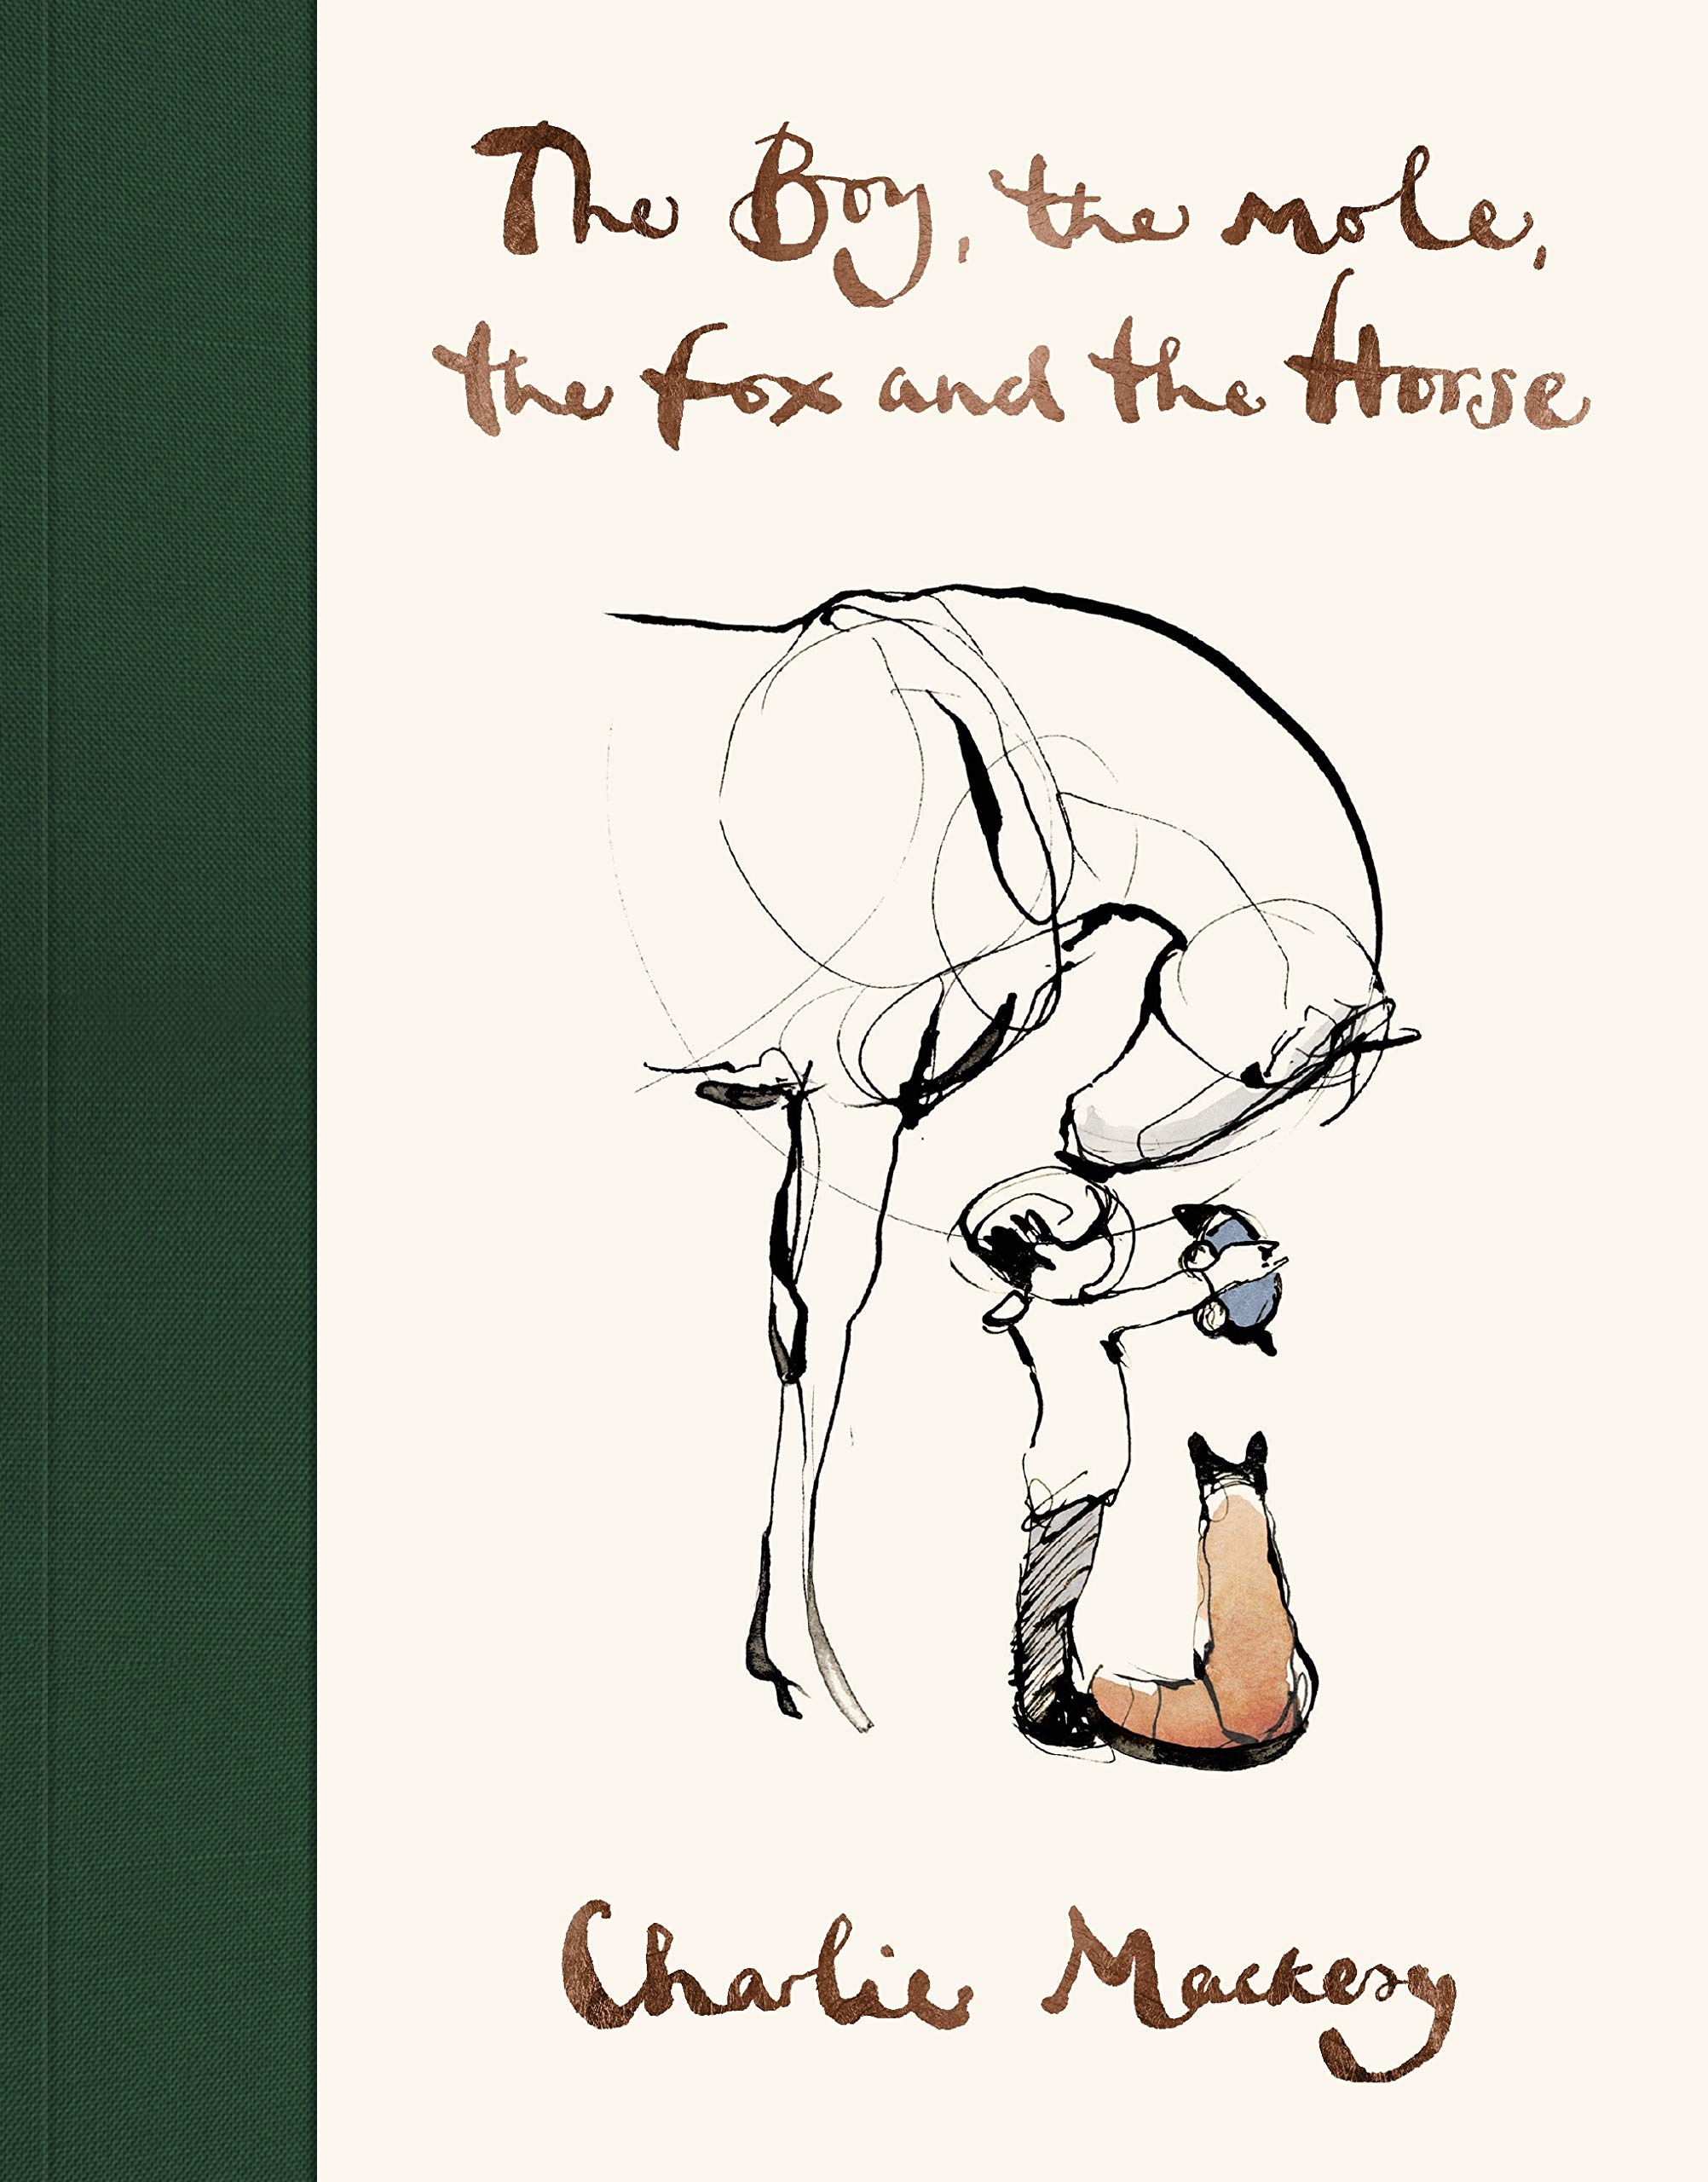 Book “The Boy, The Mole, The Fox and The Horse” by Charlie Mackesy — October 29, 2020